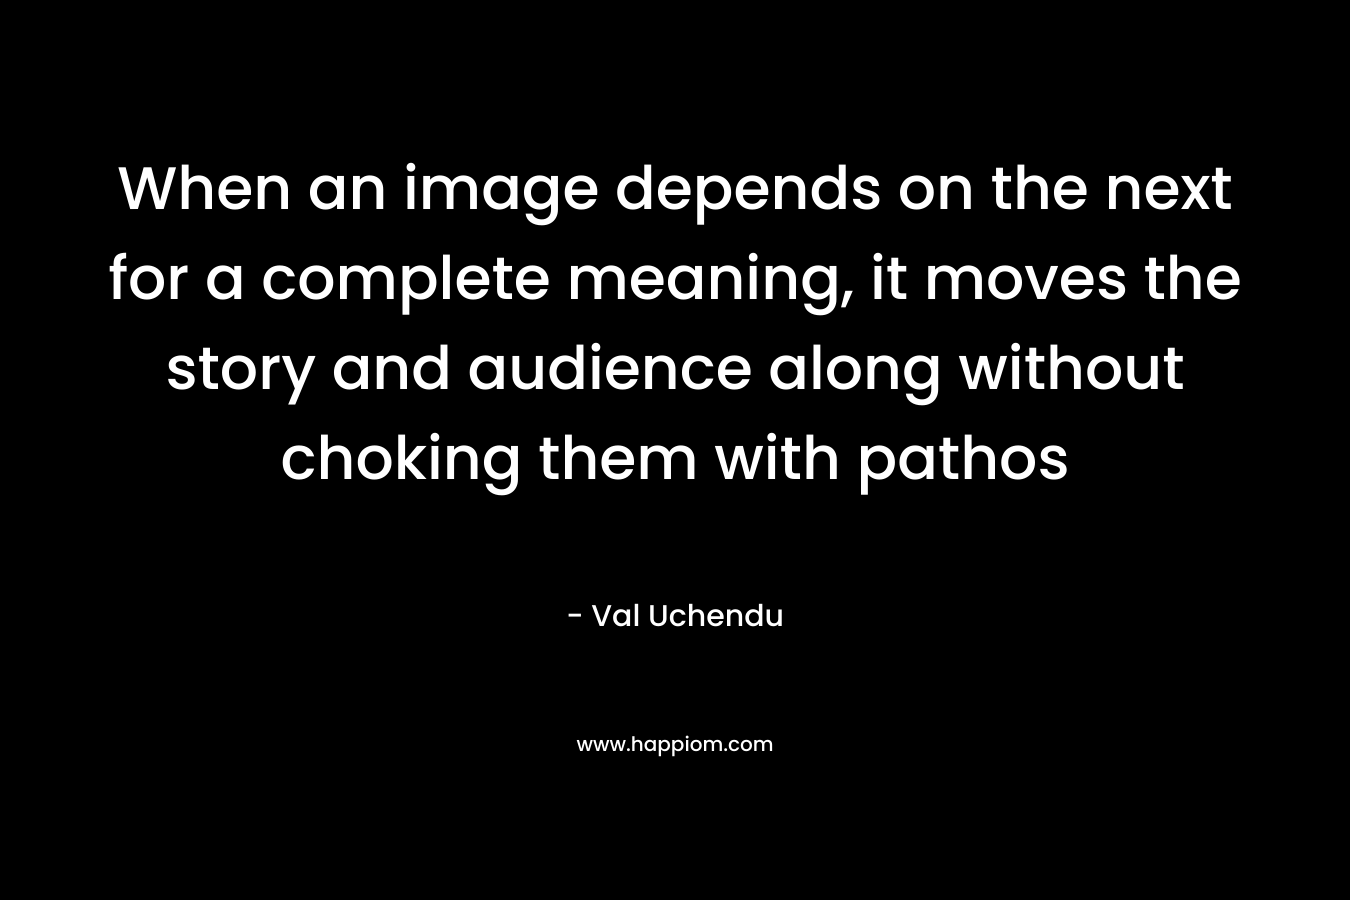 When an image depends on the next for a complete meaning, it moves the story and audience along without choking them with pathos – Val Uchendu